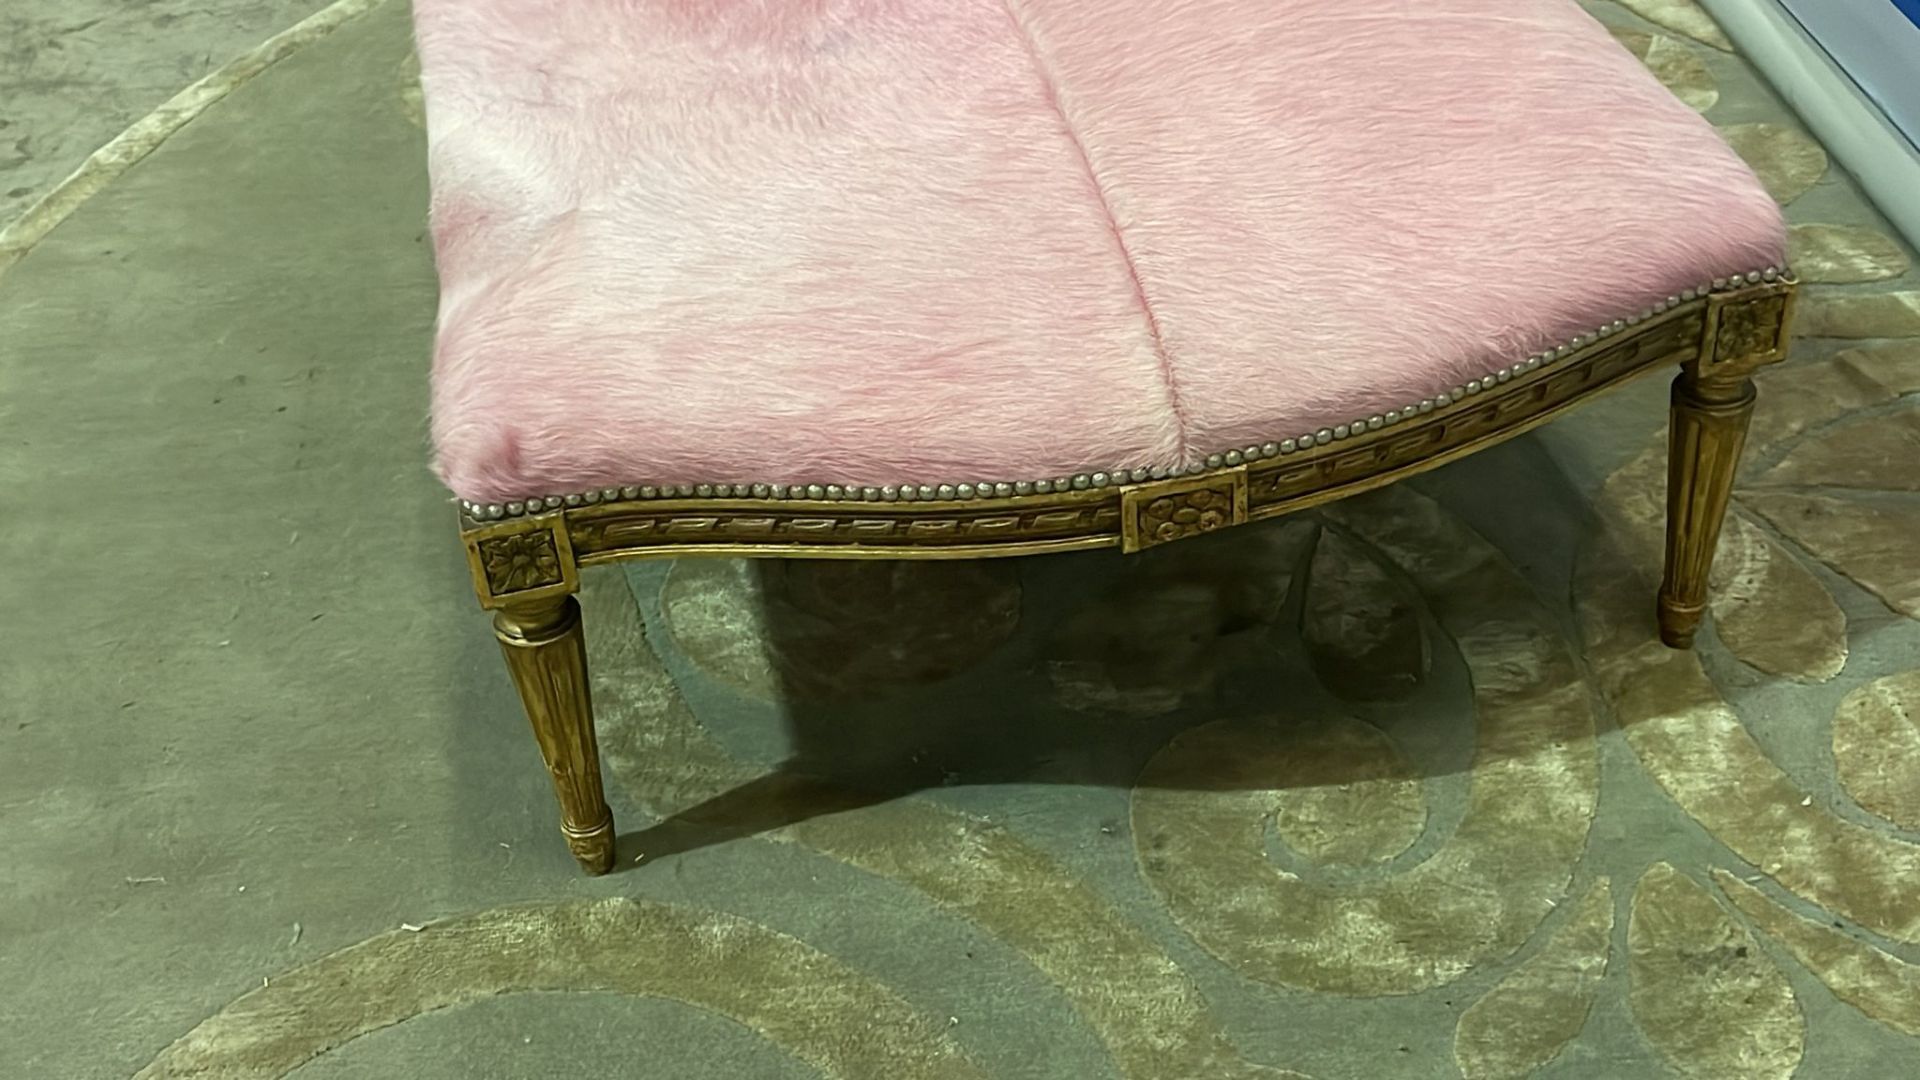 Foot Stool With A Padded Top Covered In Natural Dyed Hide And Brass Pin Detailing, This Gilt Wood - Image 4 of 4